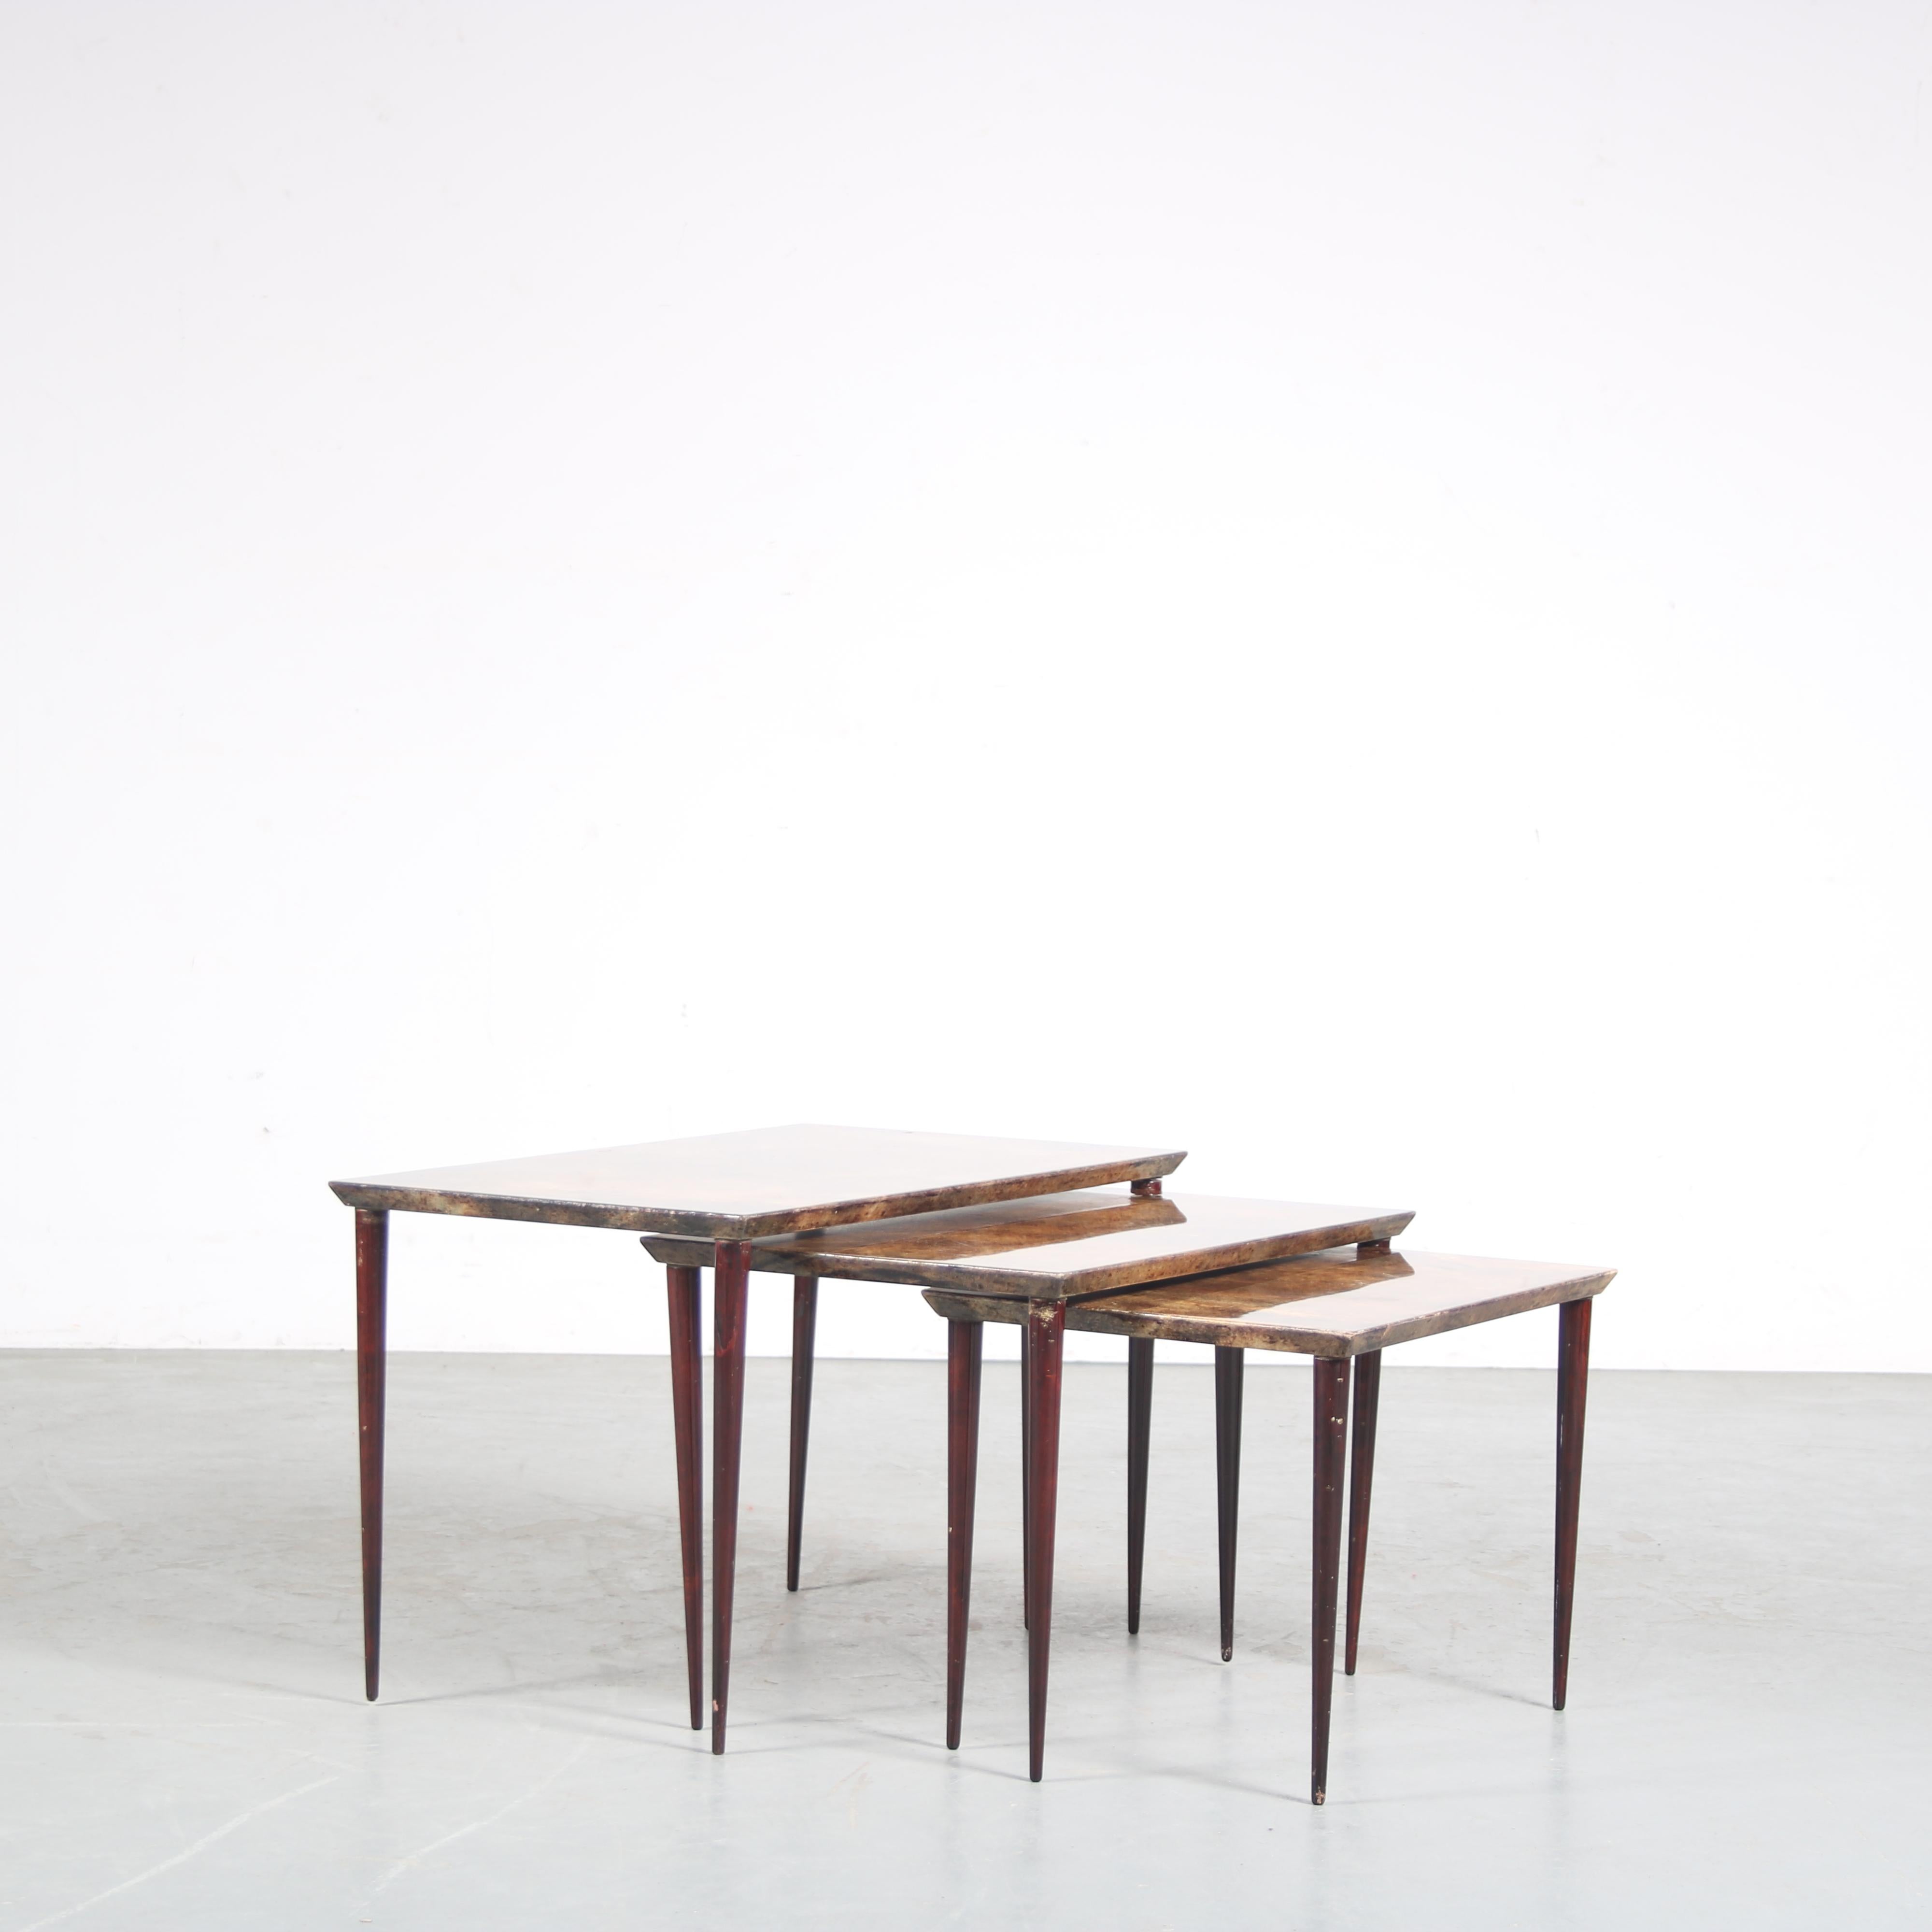 A beautiful set of three nesting tables, designed by Aldo Tura in Italy around 1950.

The tables are all made of high quality deep brown wood with parchments tops, giving them a unique and highly recognizable style. The tables are beautifully